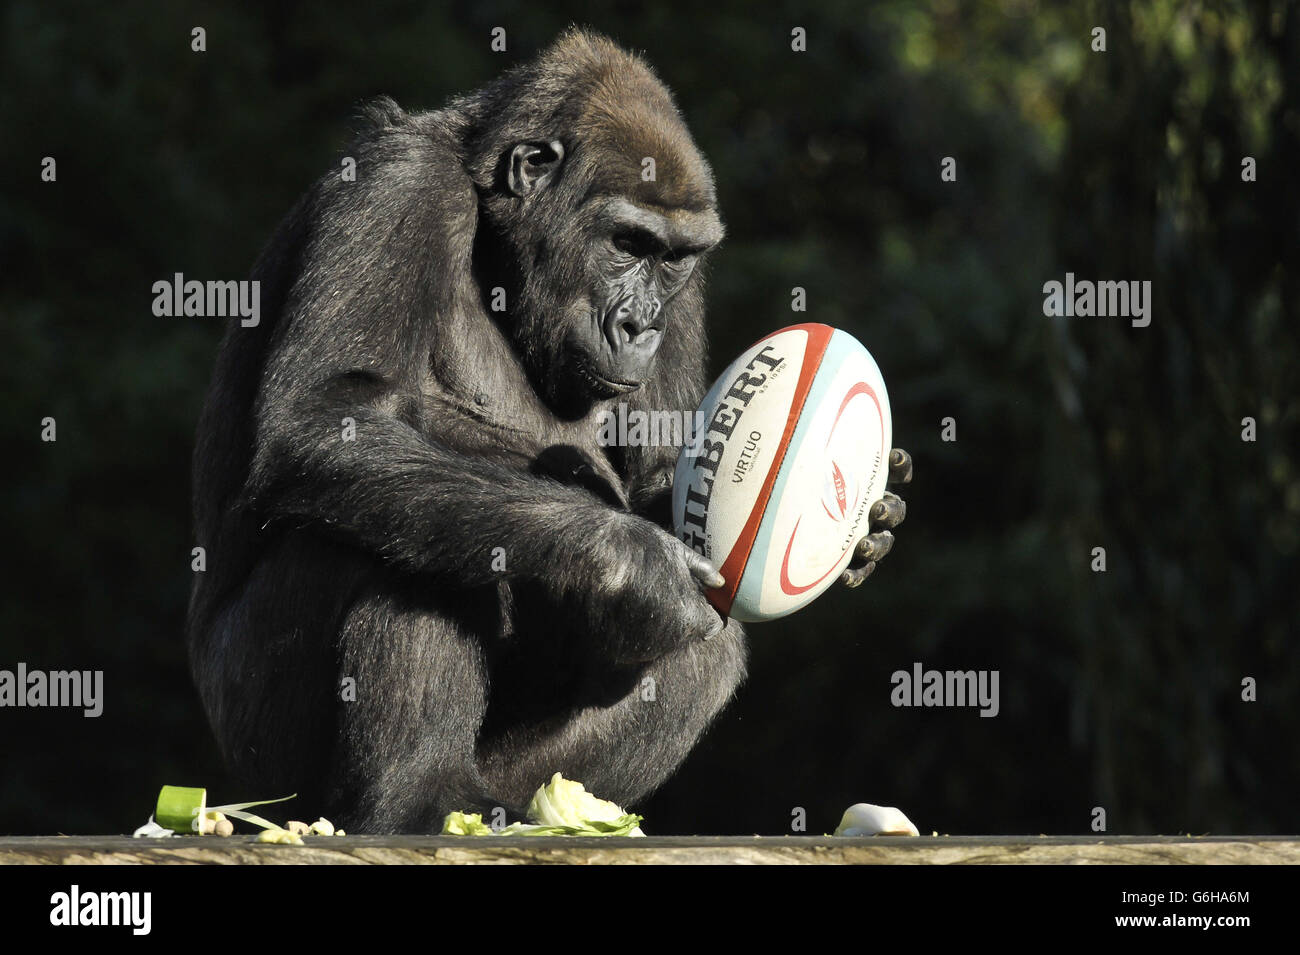 Komale the Western Lowland Gorilla inspects a rugby ball that has been placed into the gorilla enclosure at Bristol Zoo as part of their enrichment programme, where they are given things to stimulate and encourage playful behaviour. Stock Photo